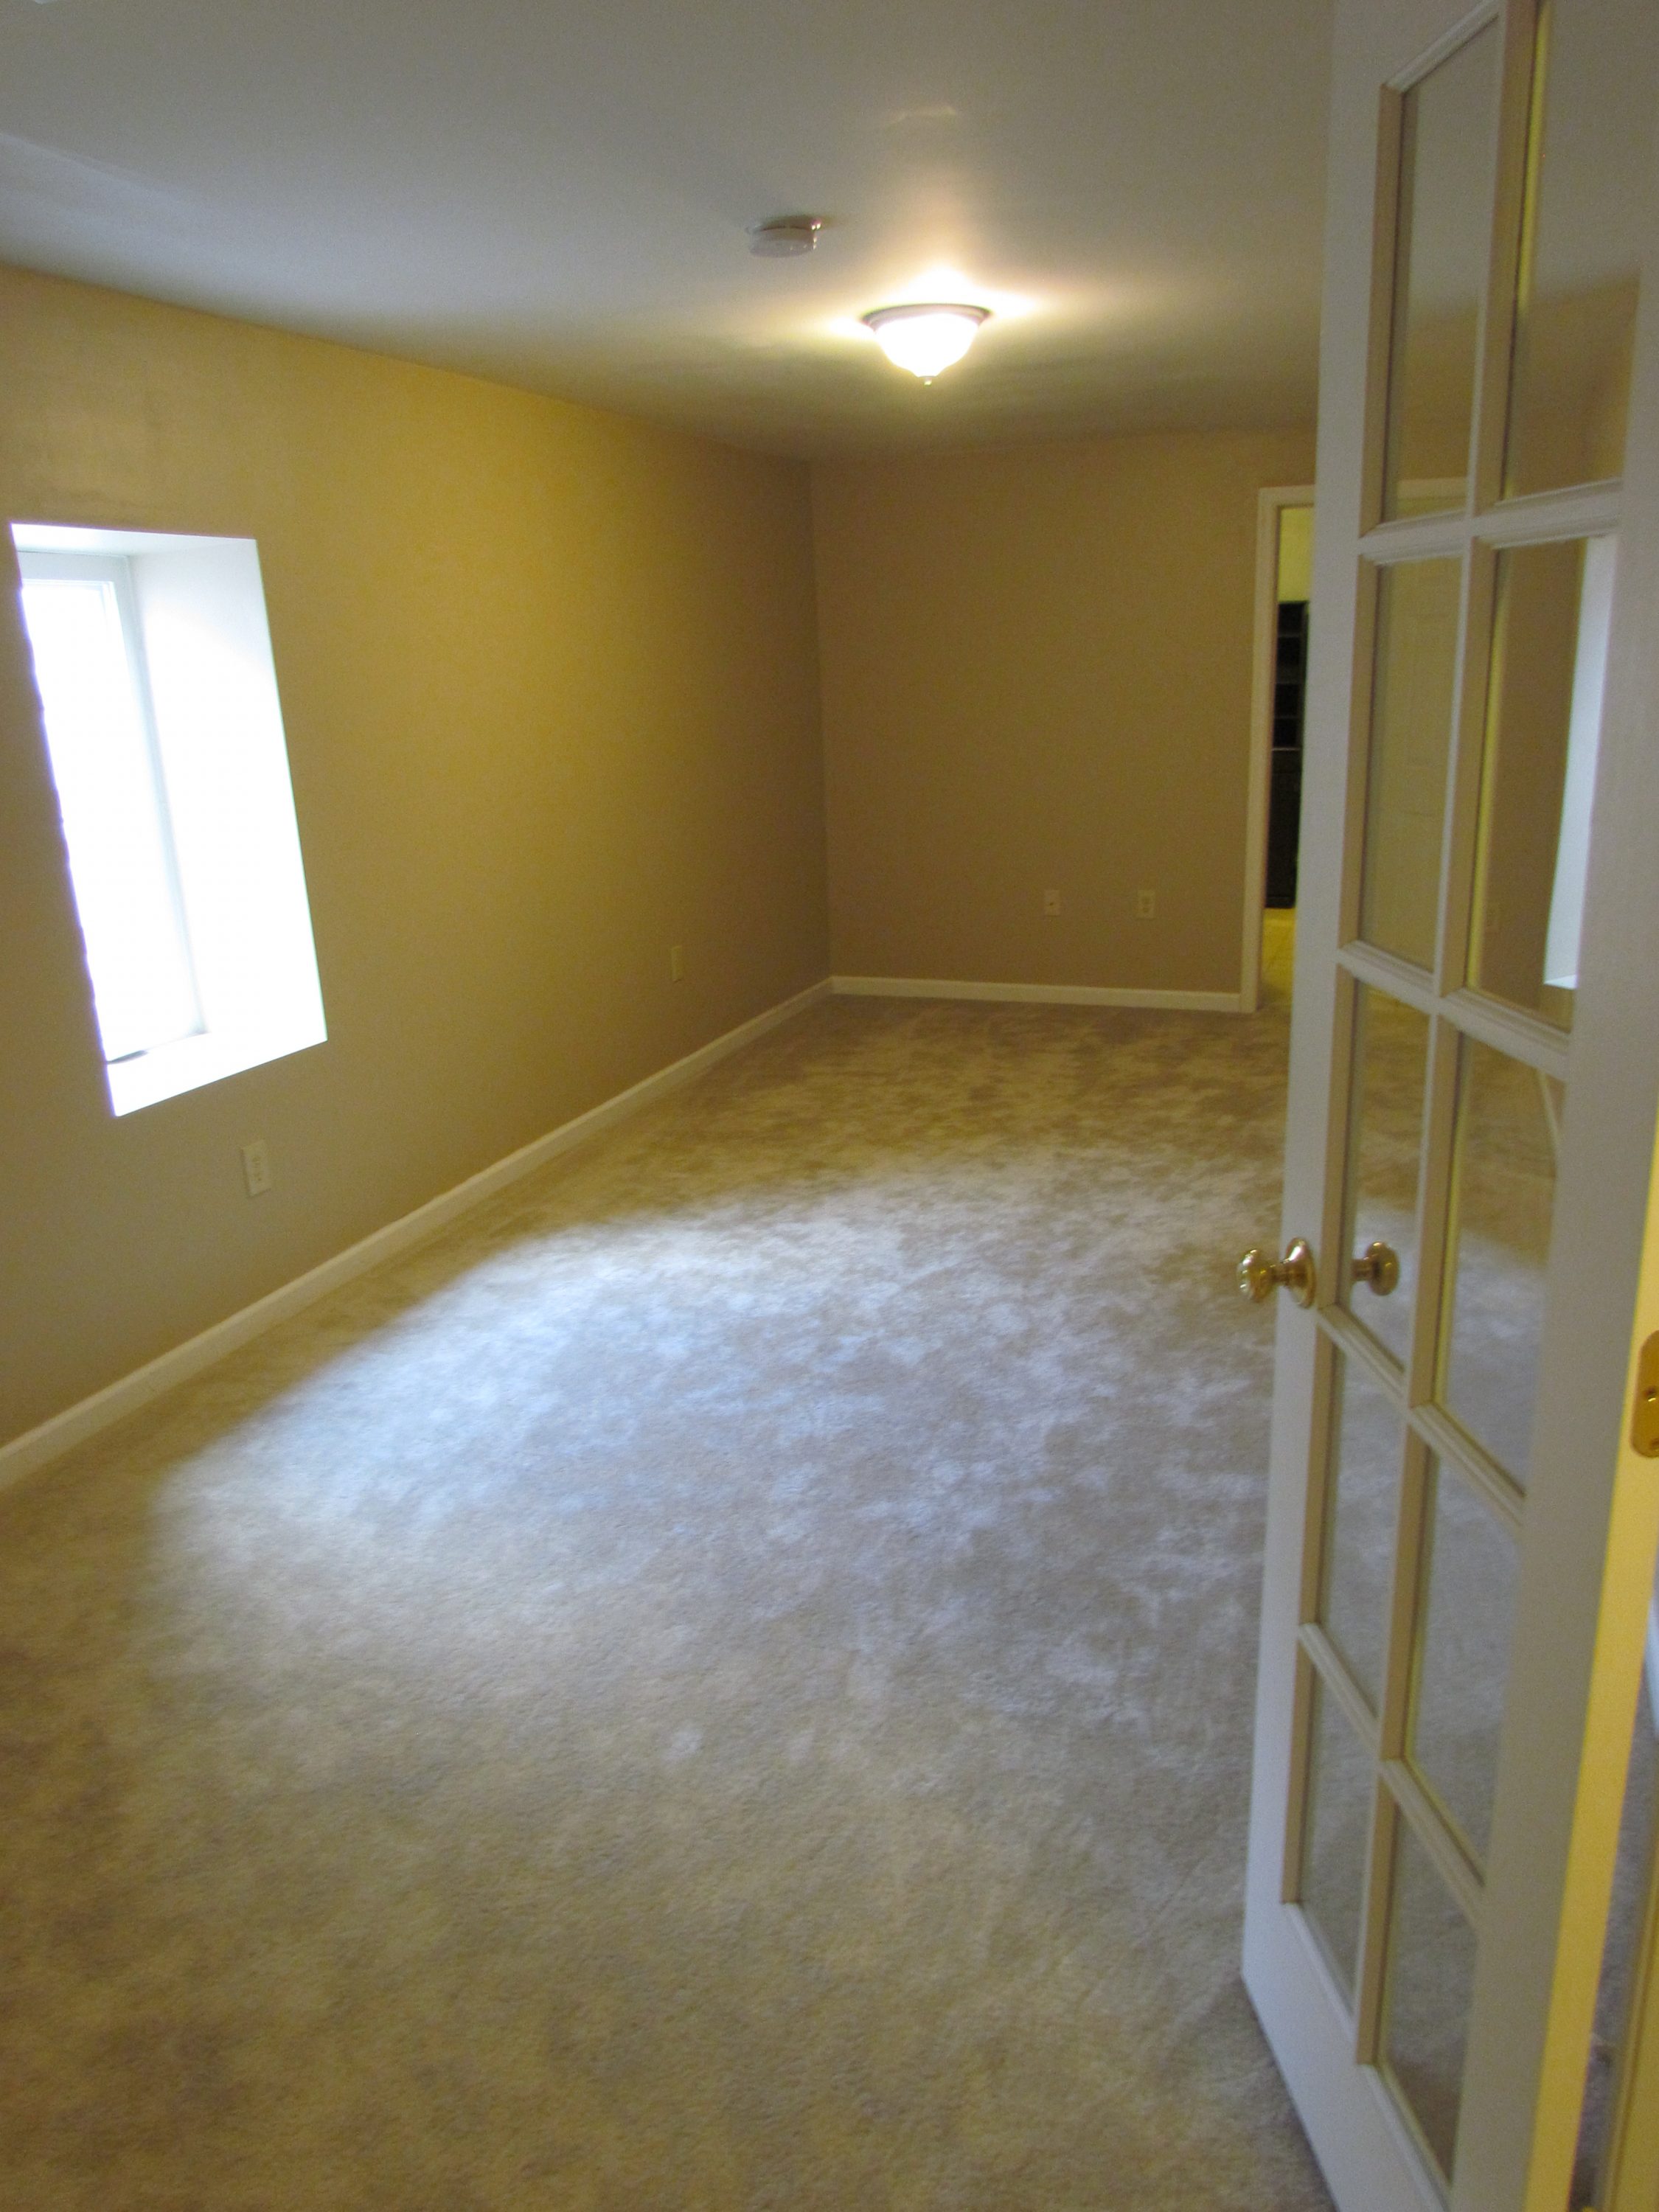 Finished Basement To Rent center room